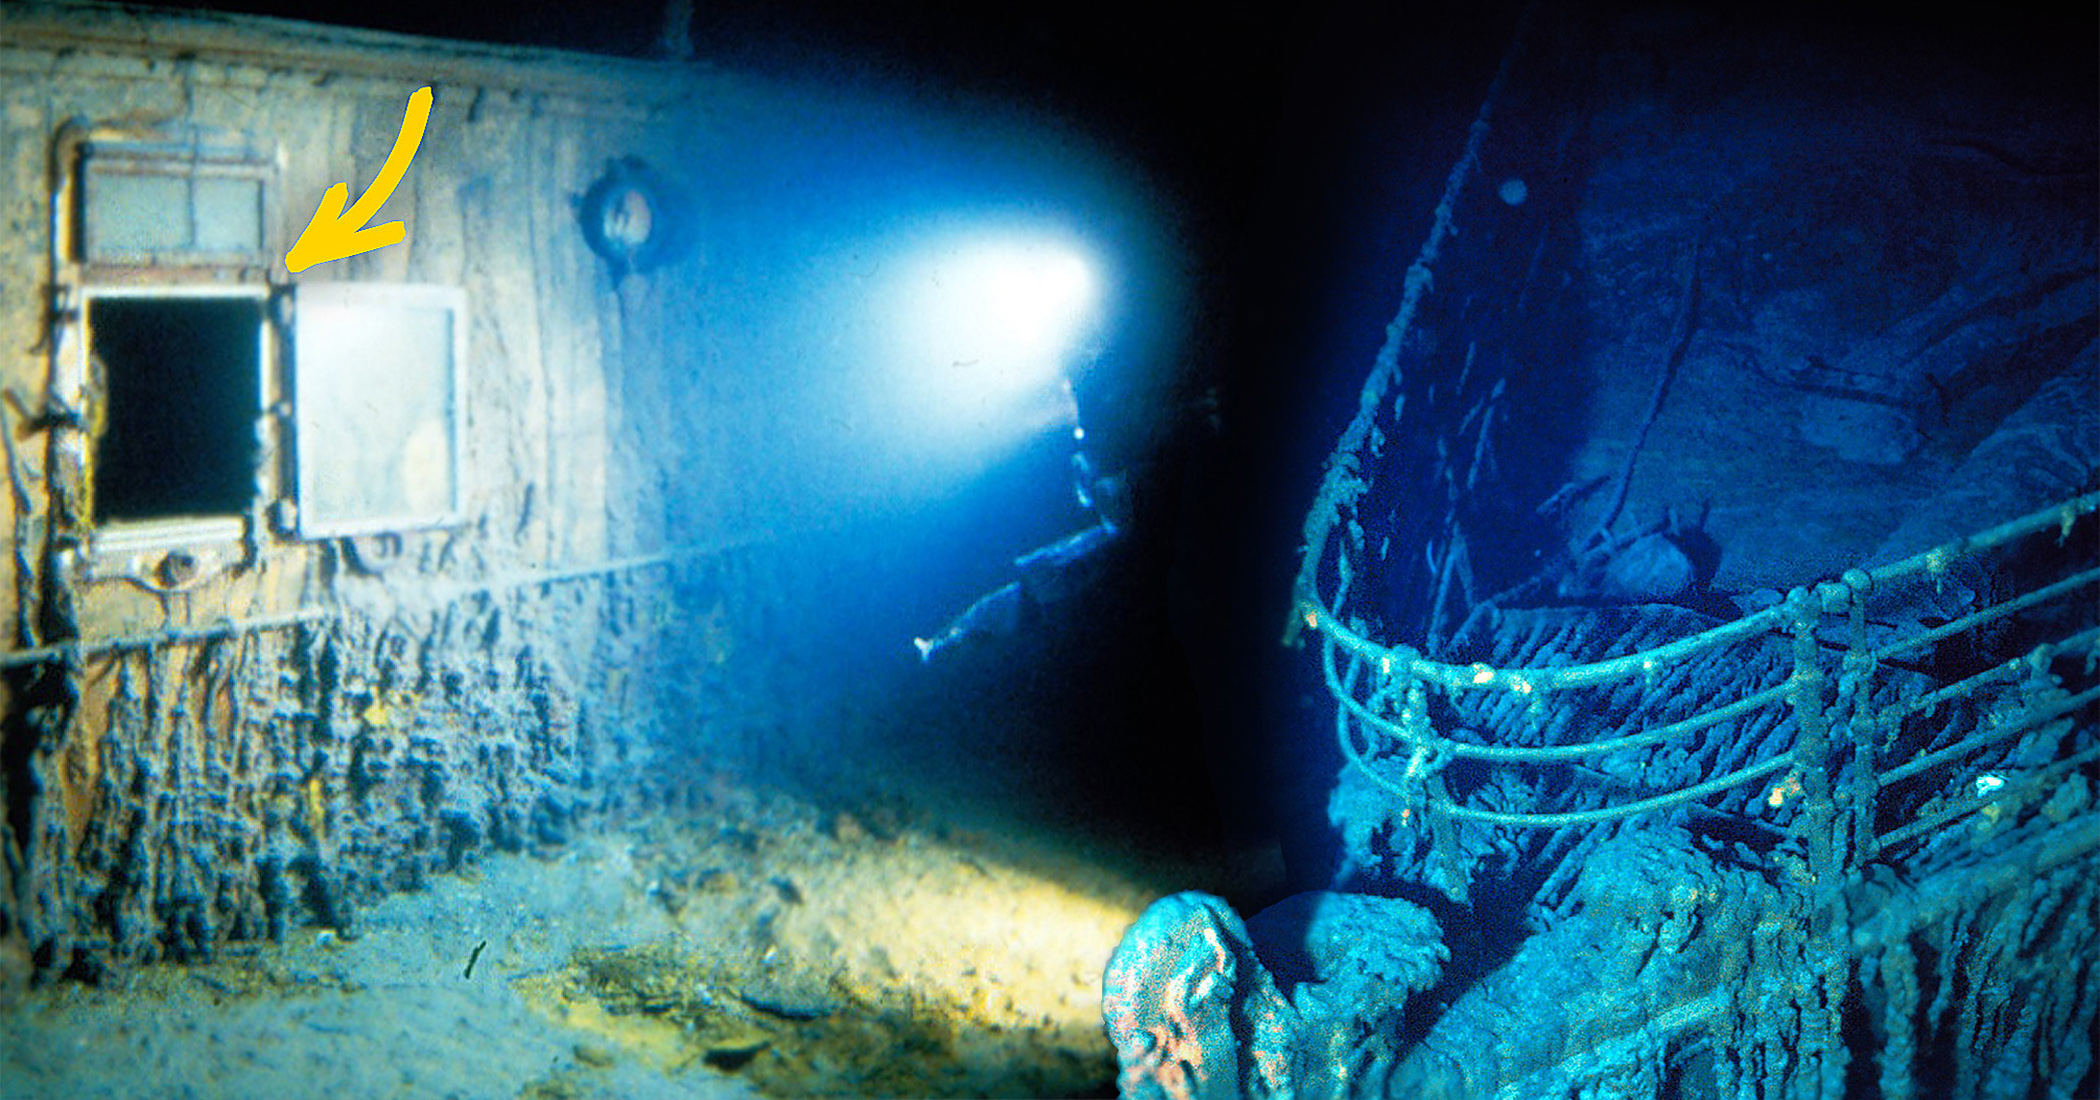 NextImg:Never-before-seen VIDEO of sunken Titanic released—marks first time humans feast eyes on wreck